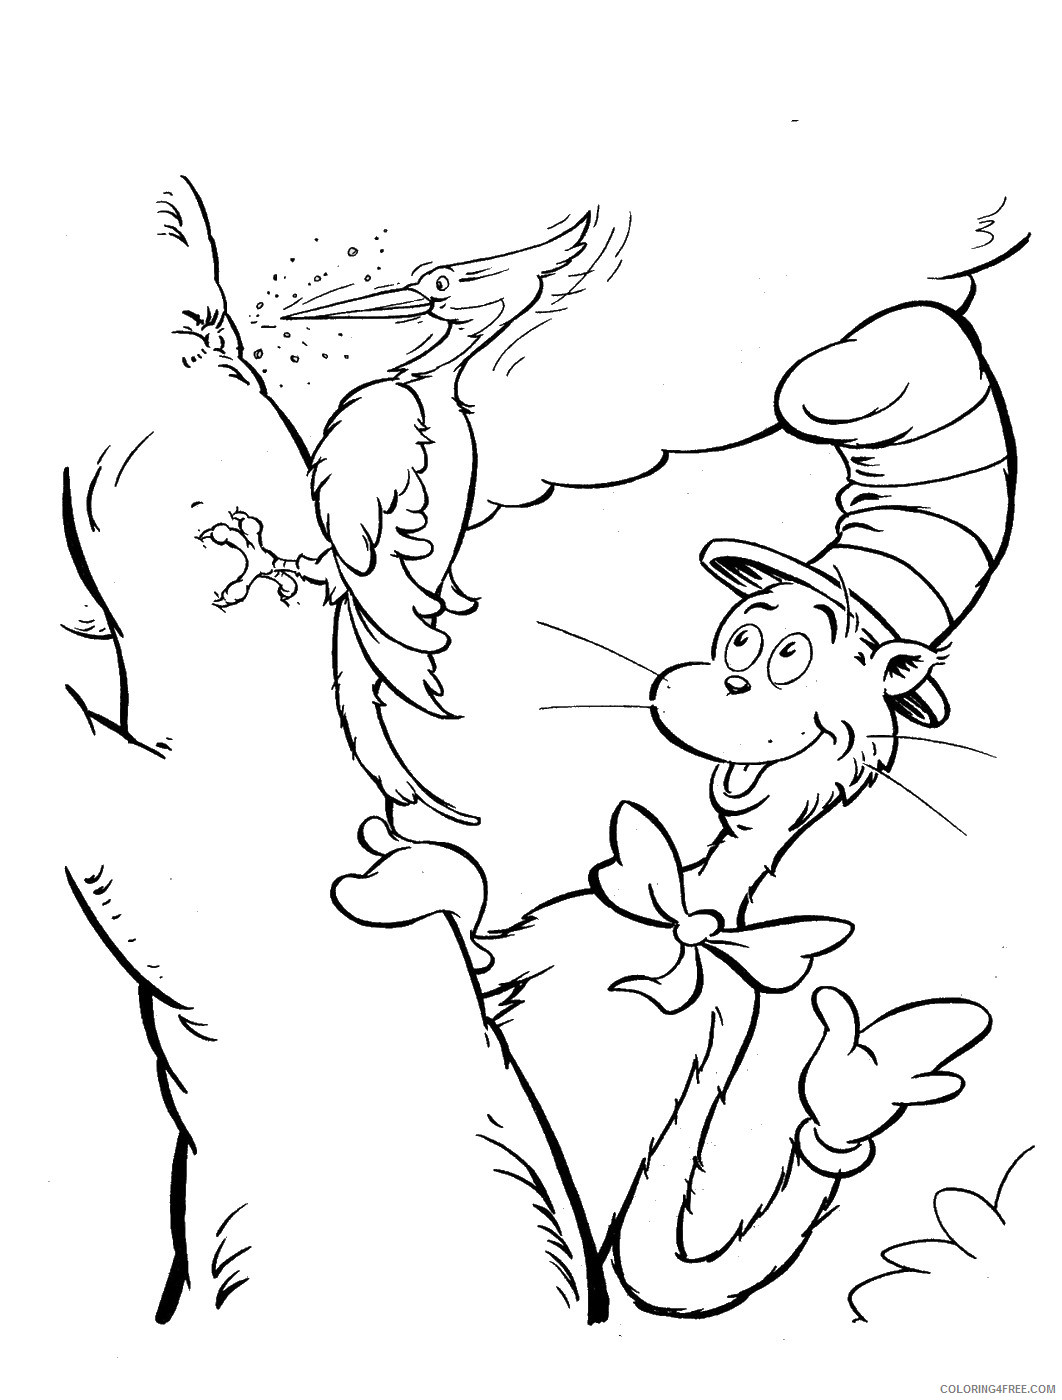 The Cat in the Hat Coloring Pages Cartoons cat_hat_cl_23 Printable 2020 6386 Coloring4free